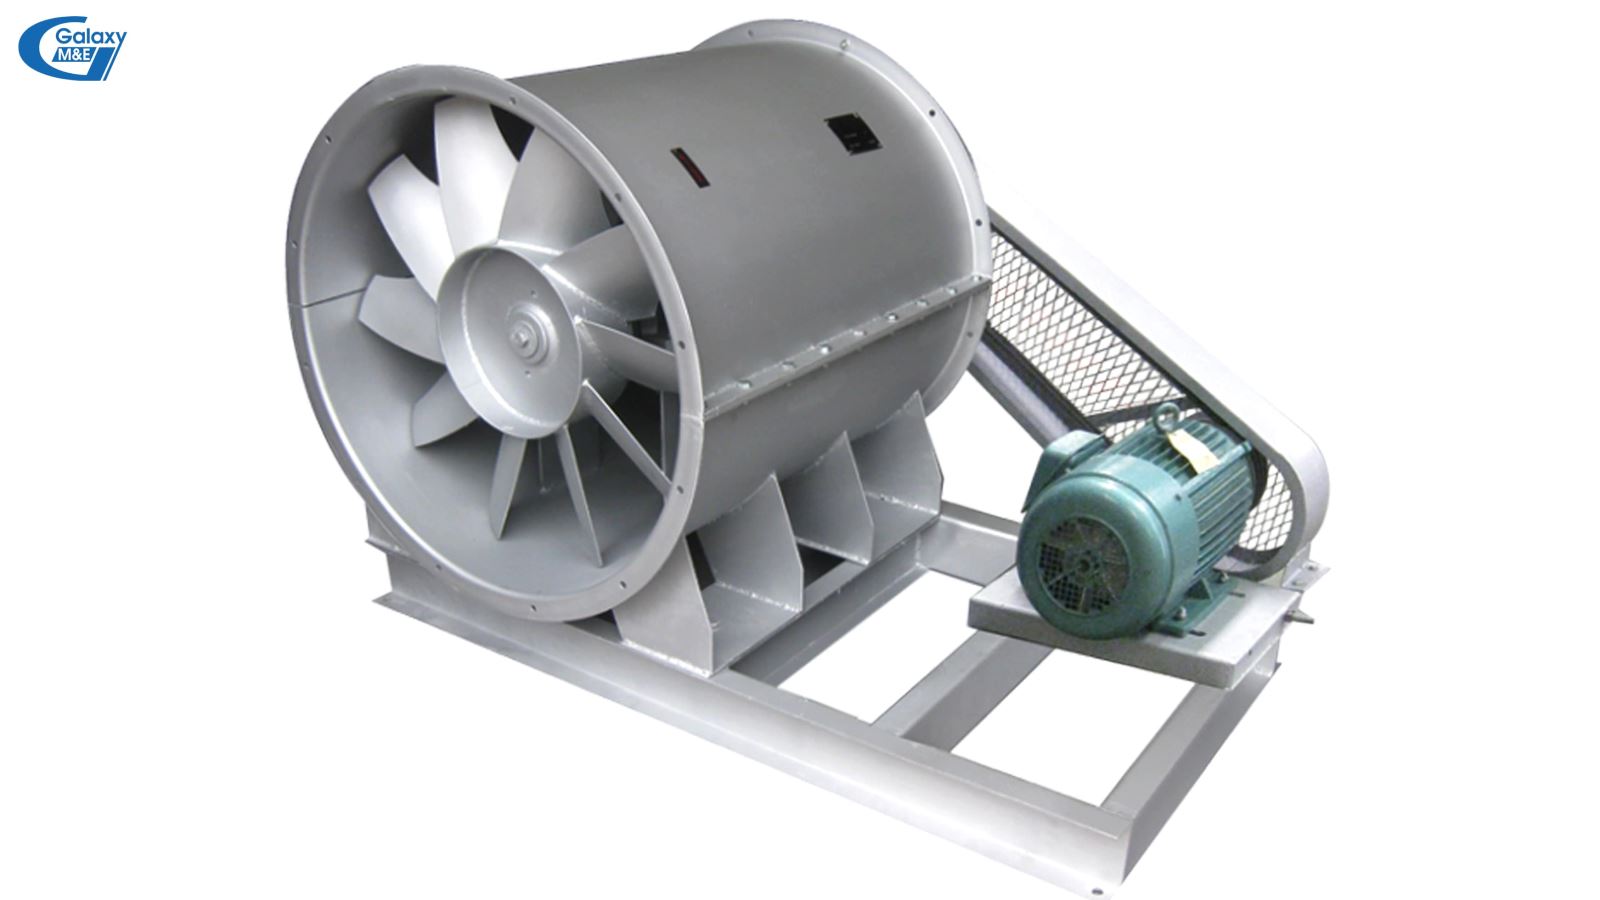 Belt driven axial fans create the largest air flow among the types of ventilation fans used for buildings.